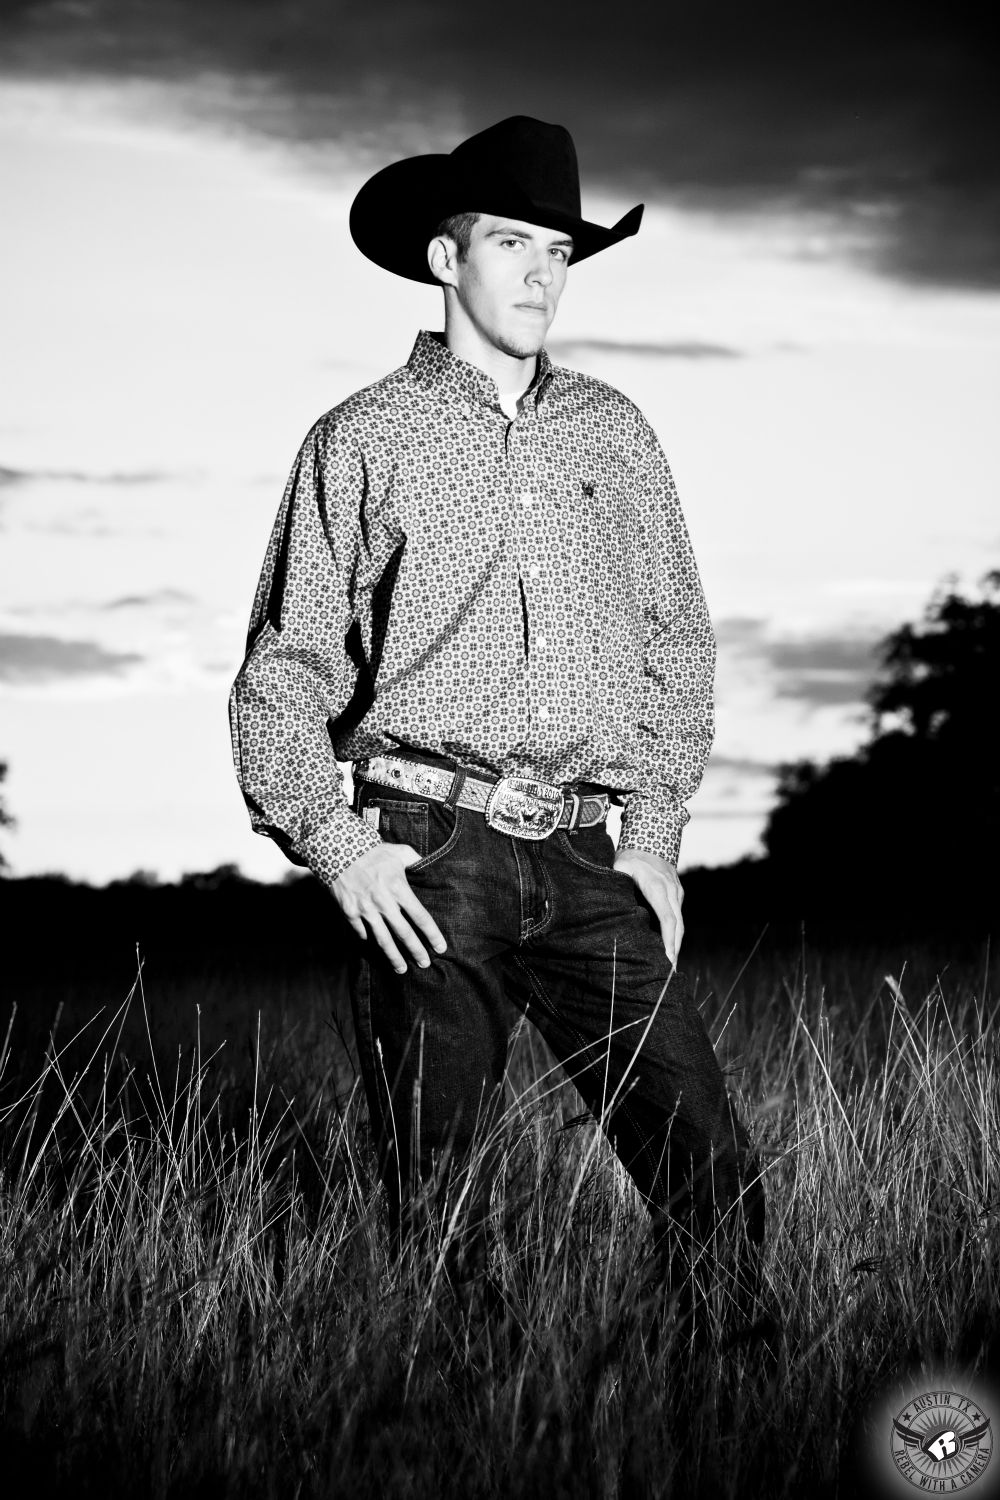 Country senior portrait photography of boy in cowboy hat and jeans taken on ranch in Central Texas.